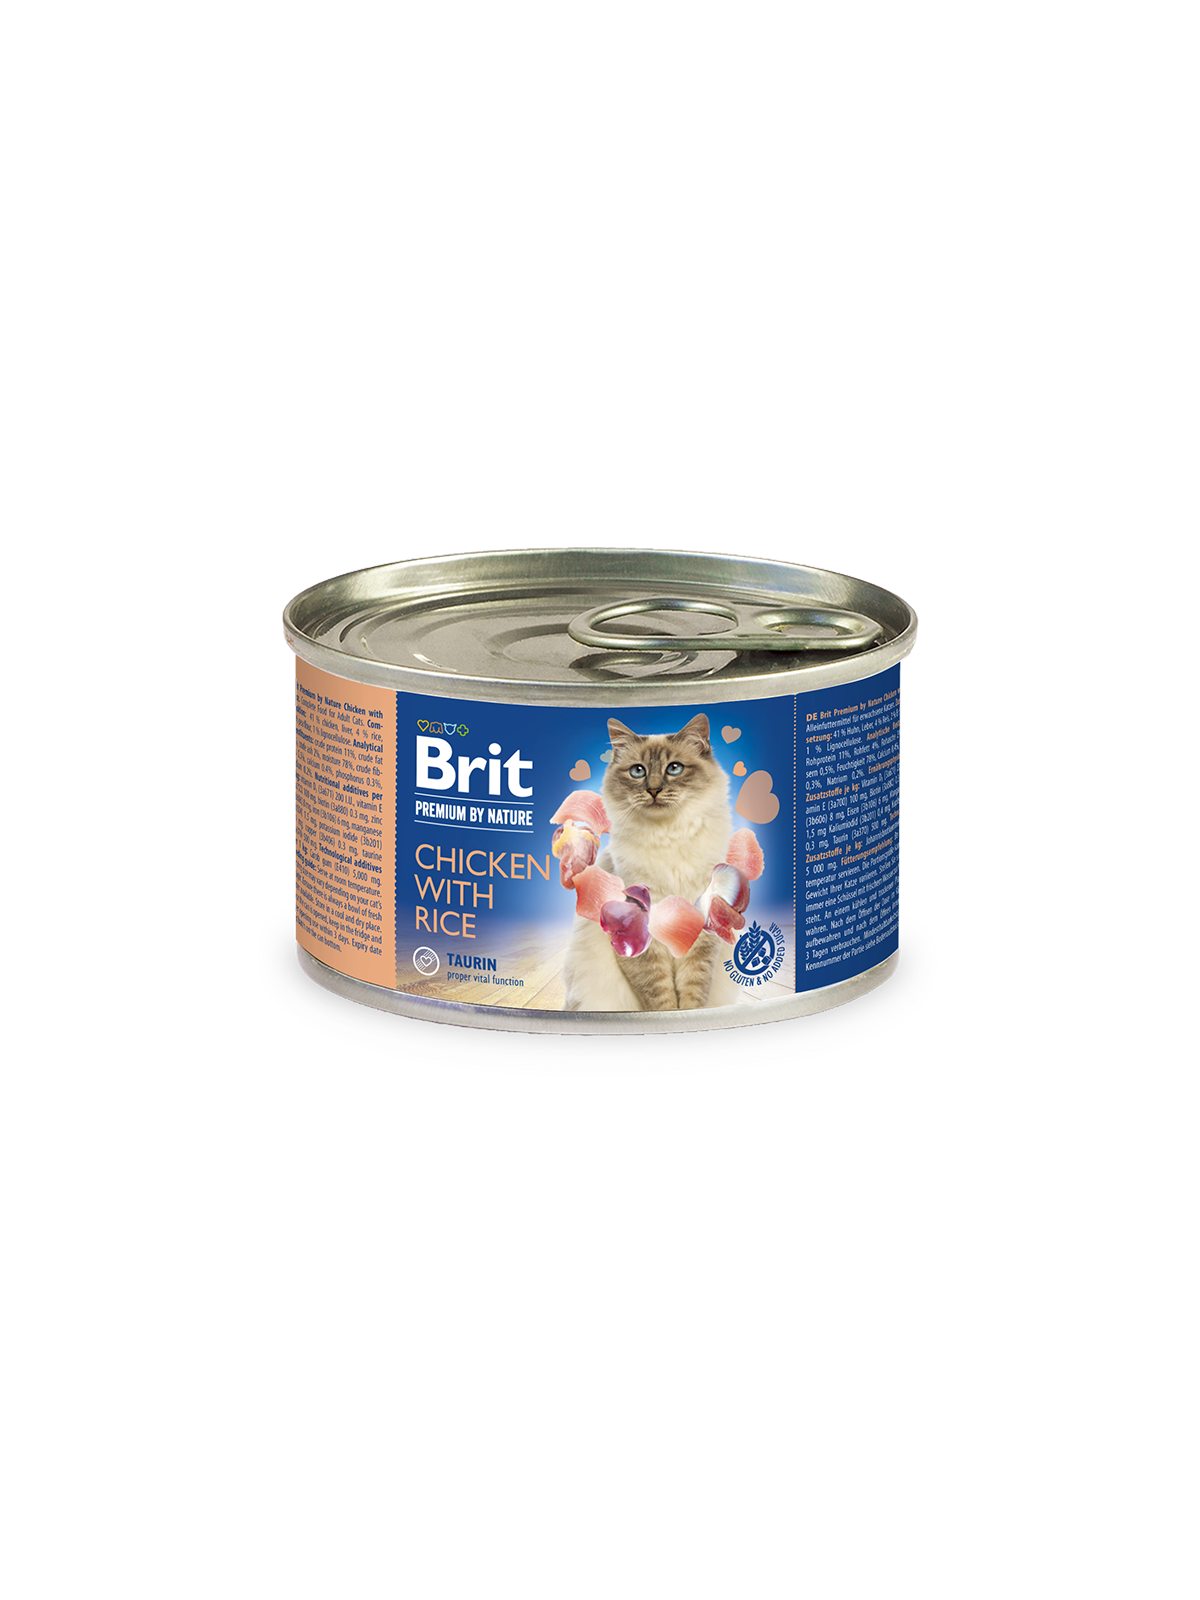 solopgang tæt Økonomisk BRIT PREMIUM BY NATURE CHICKEN WITH RICE 200g WET CAT FOOD - PETTO